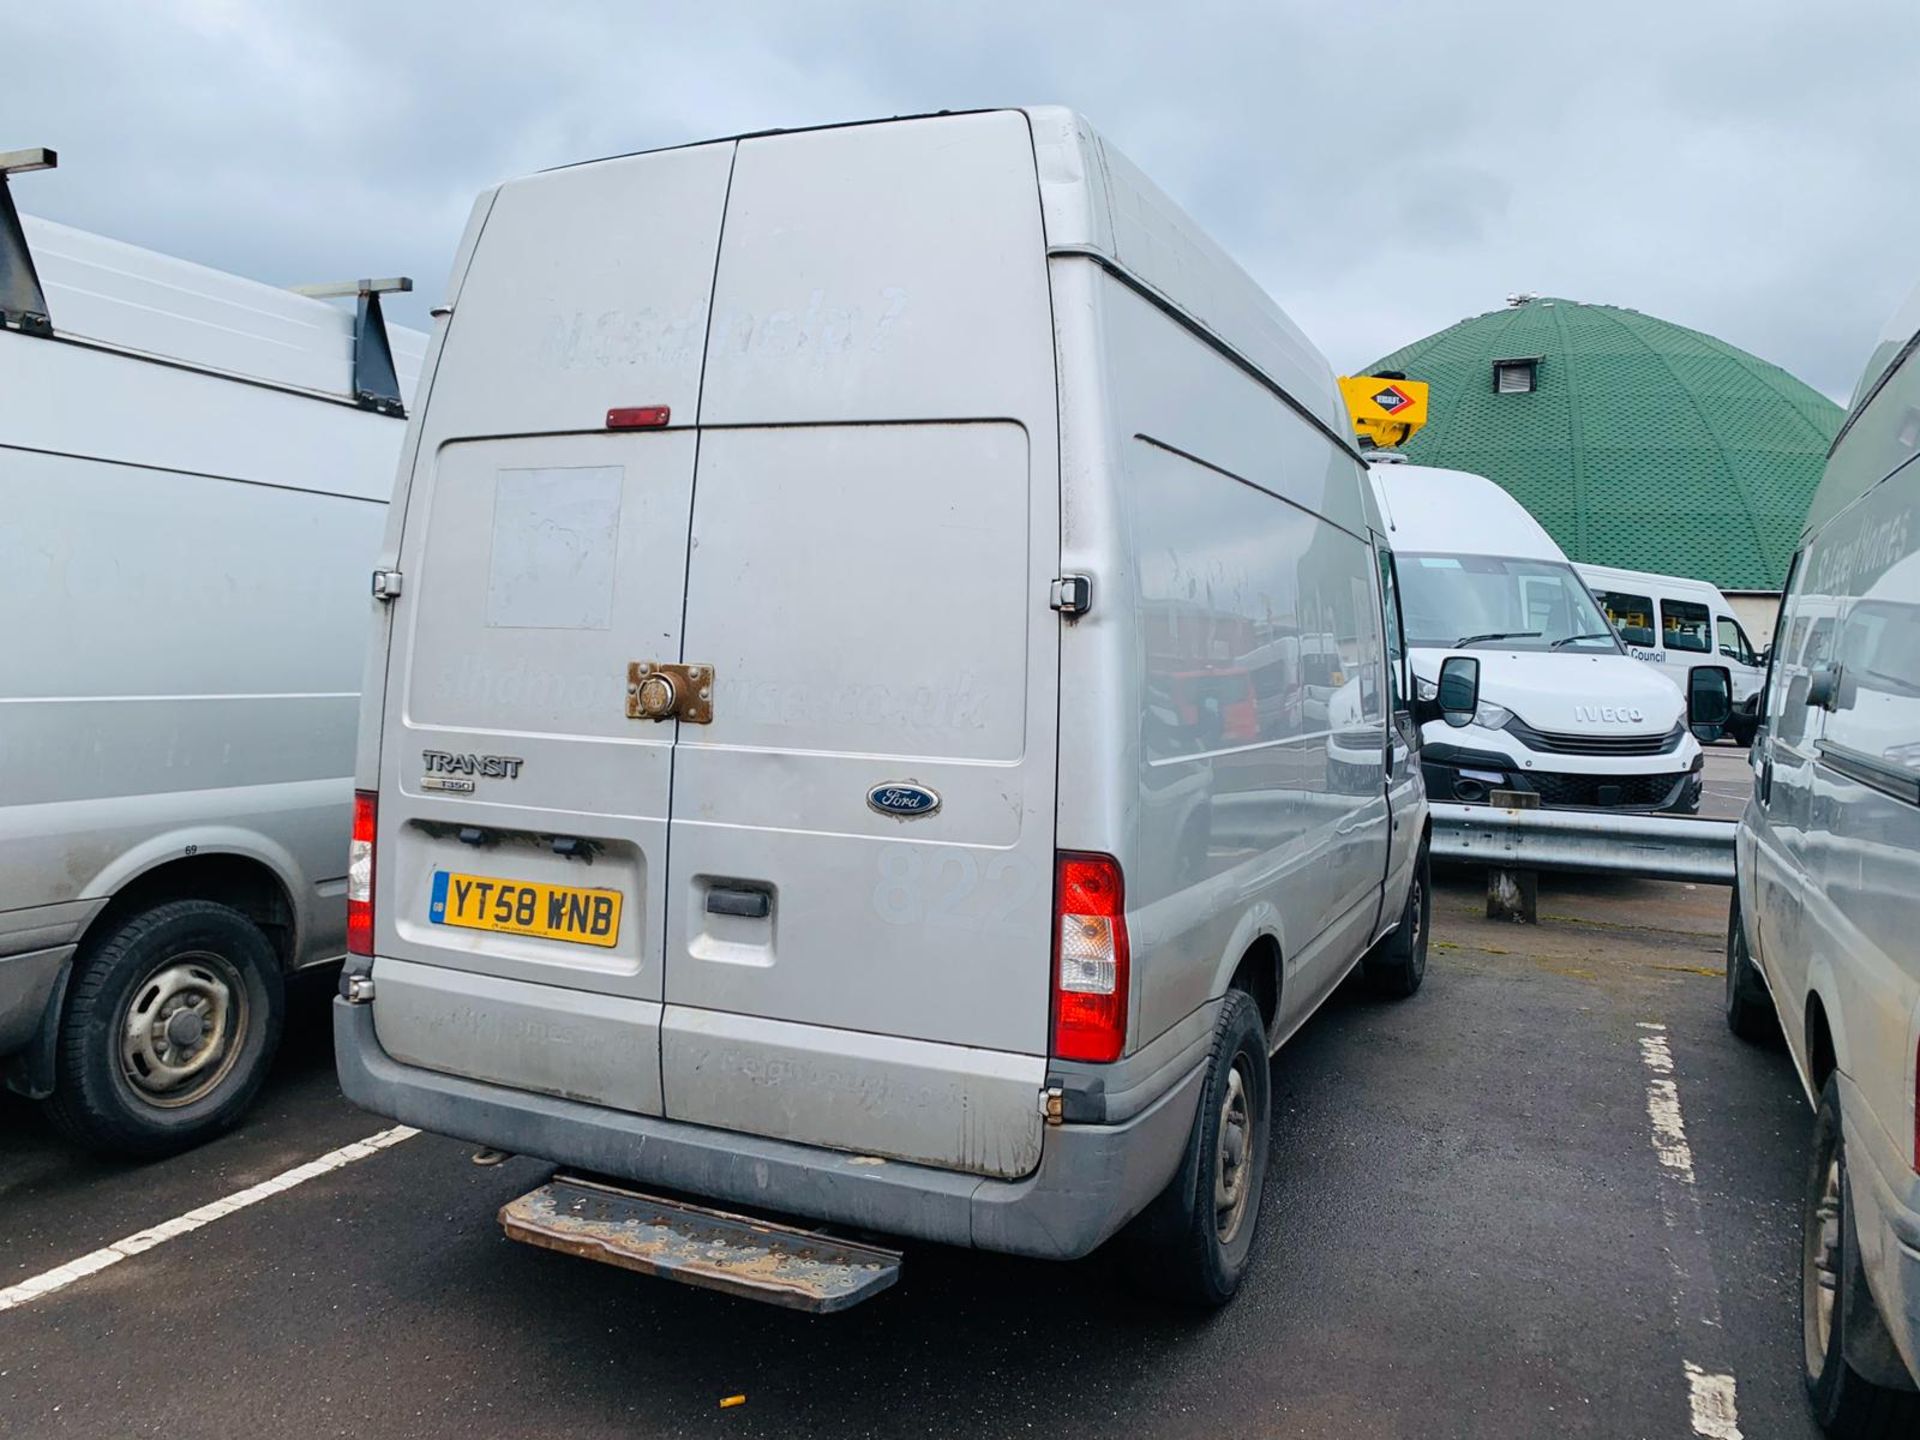 ENTRY DIRECT FROM LOCAL AUTHORITY Ford Transit Van - Image 3 of 25